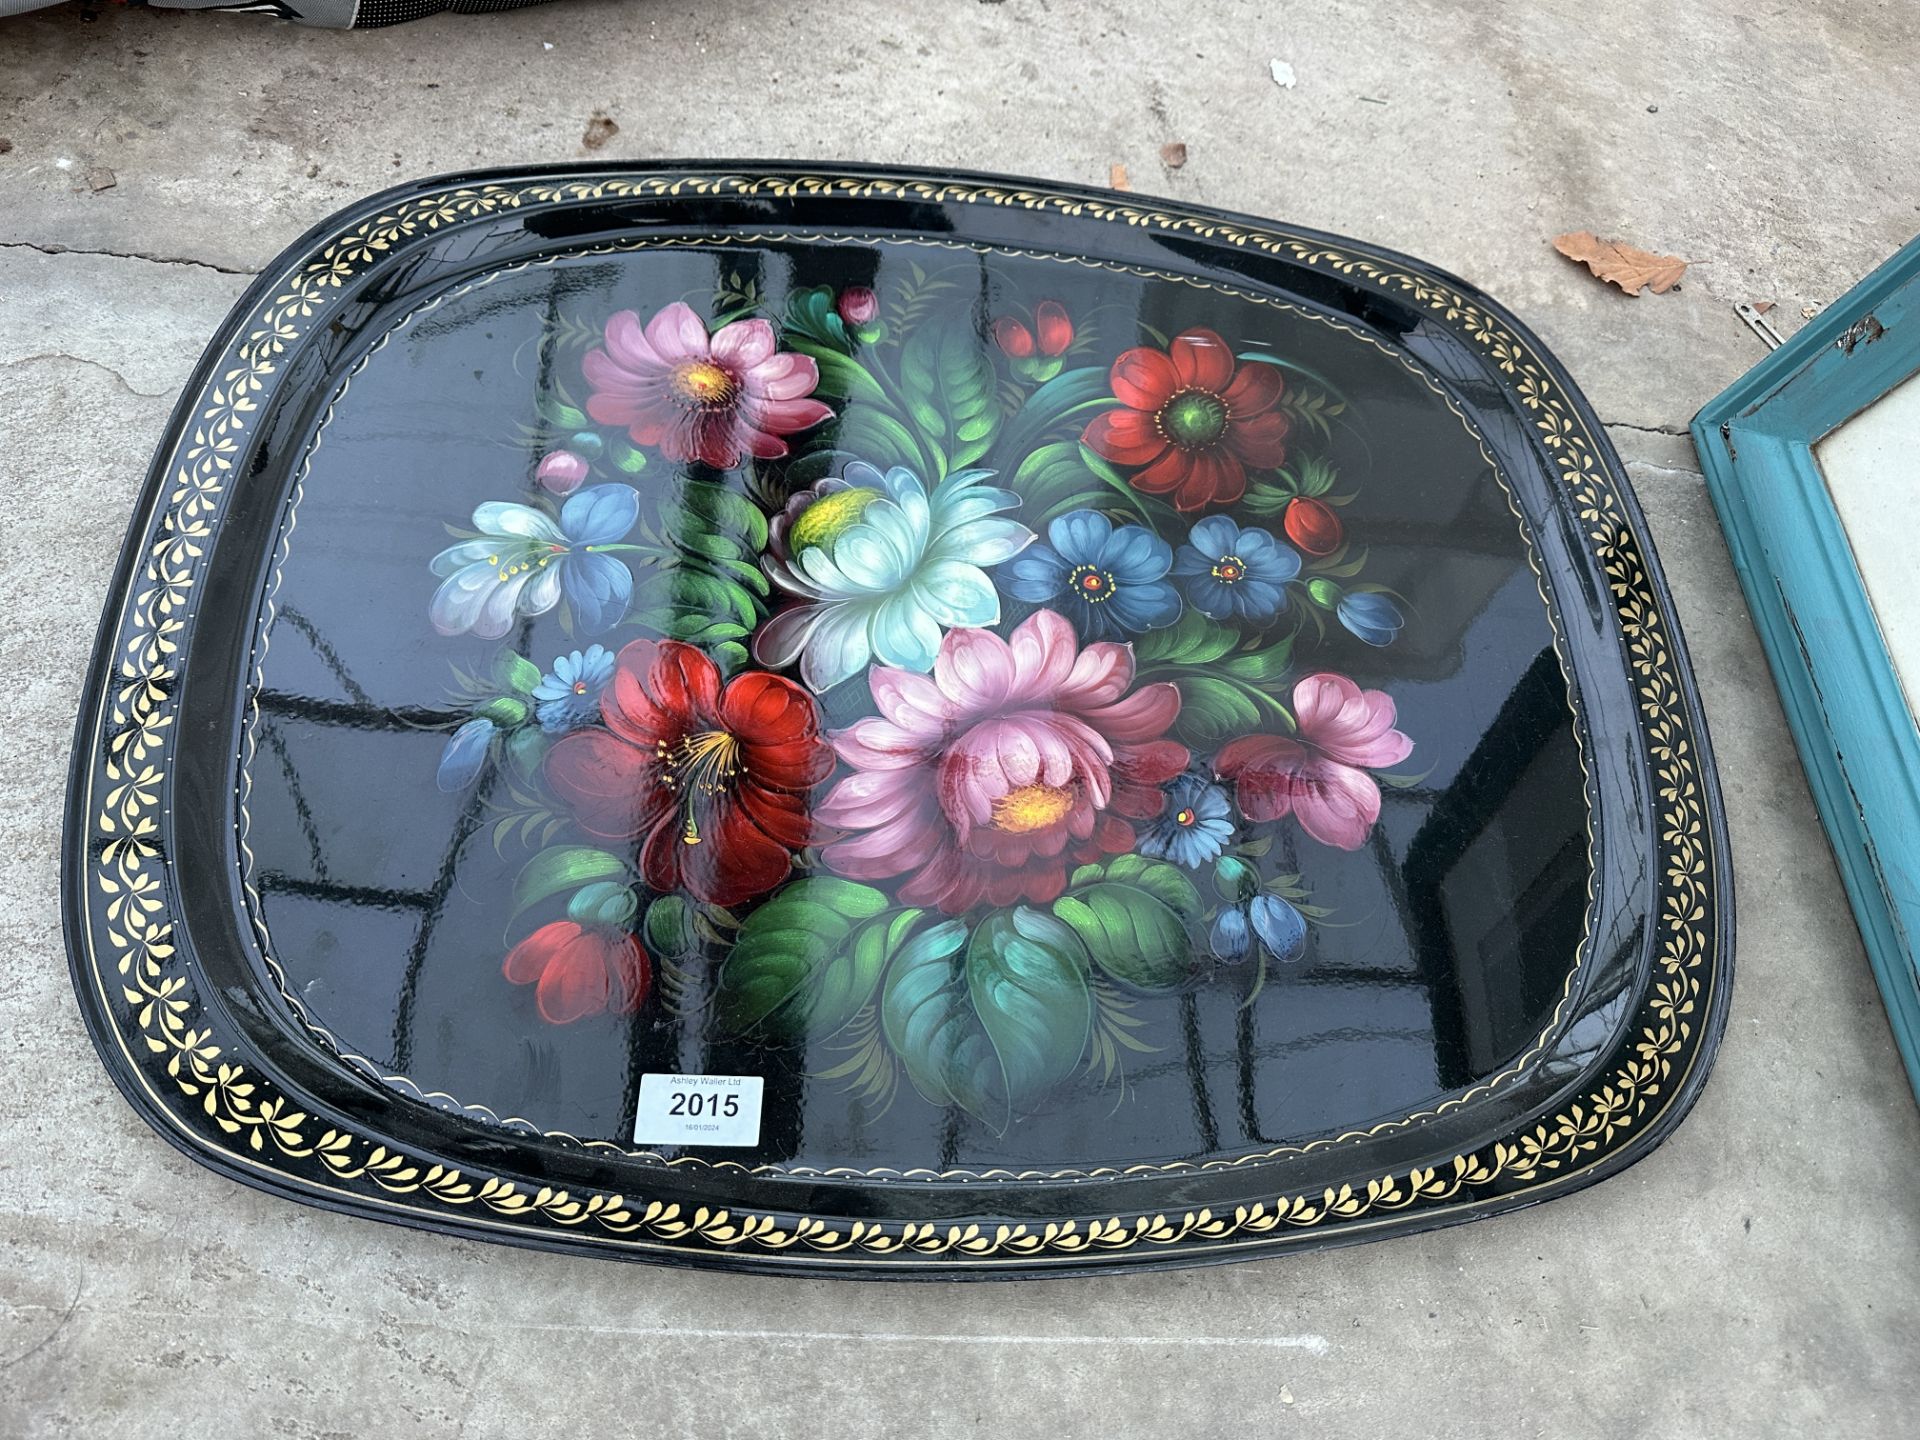 A METAL HANDPAINTED SERVING TRAY